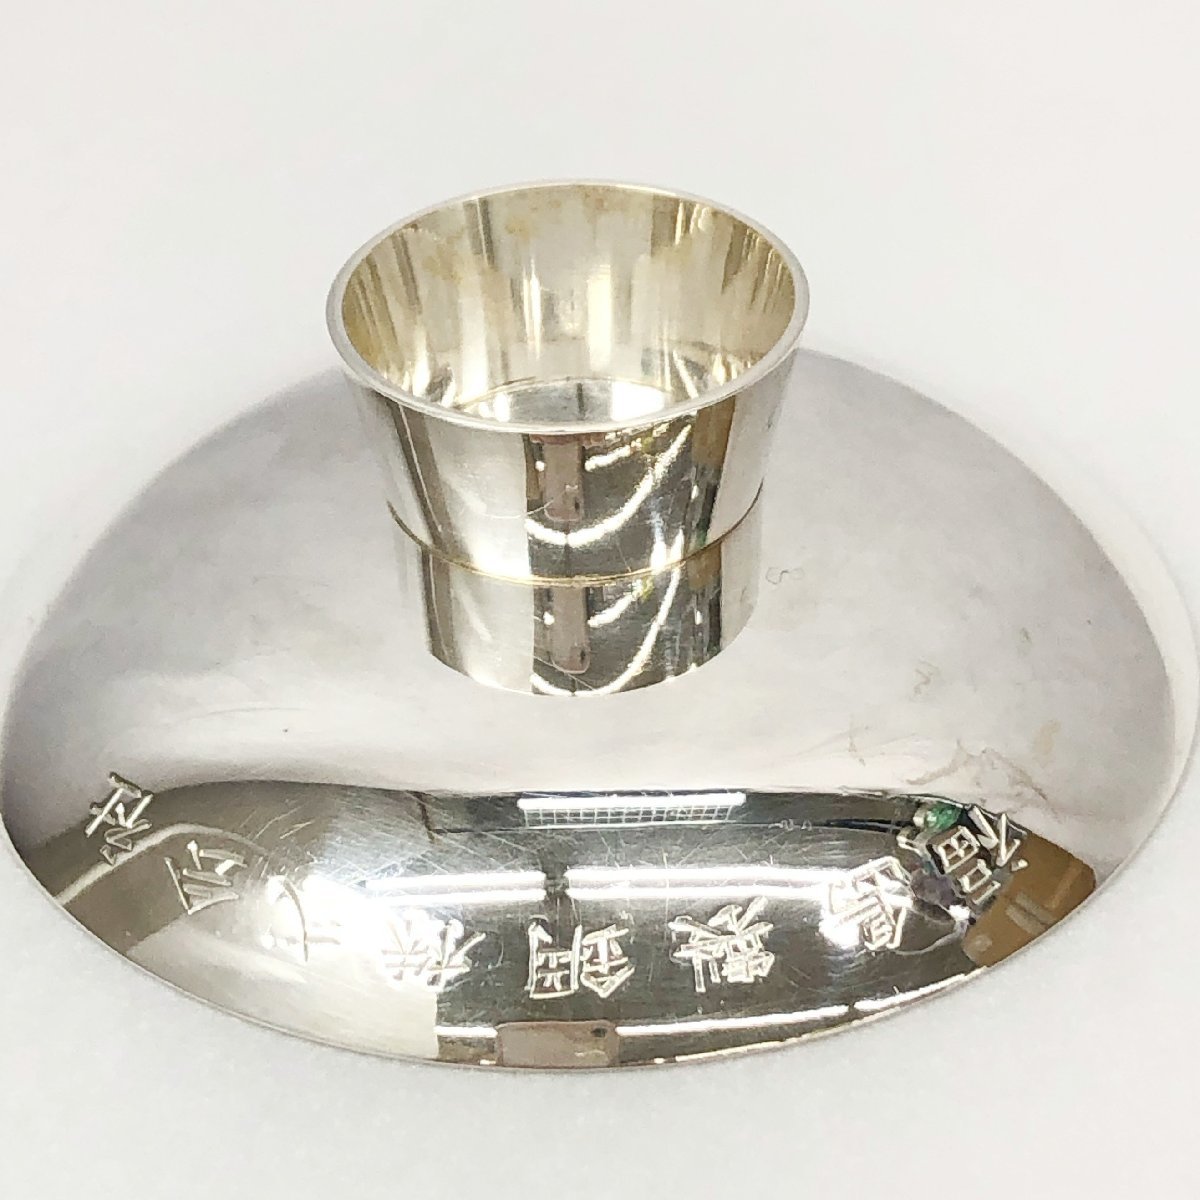  silver cup original silver silver made 2 point set gross weight approximately 108g silver silver chronicle name have diameter approximately 7.3. approximately 8.7cm sake cup 